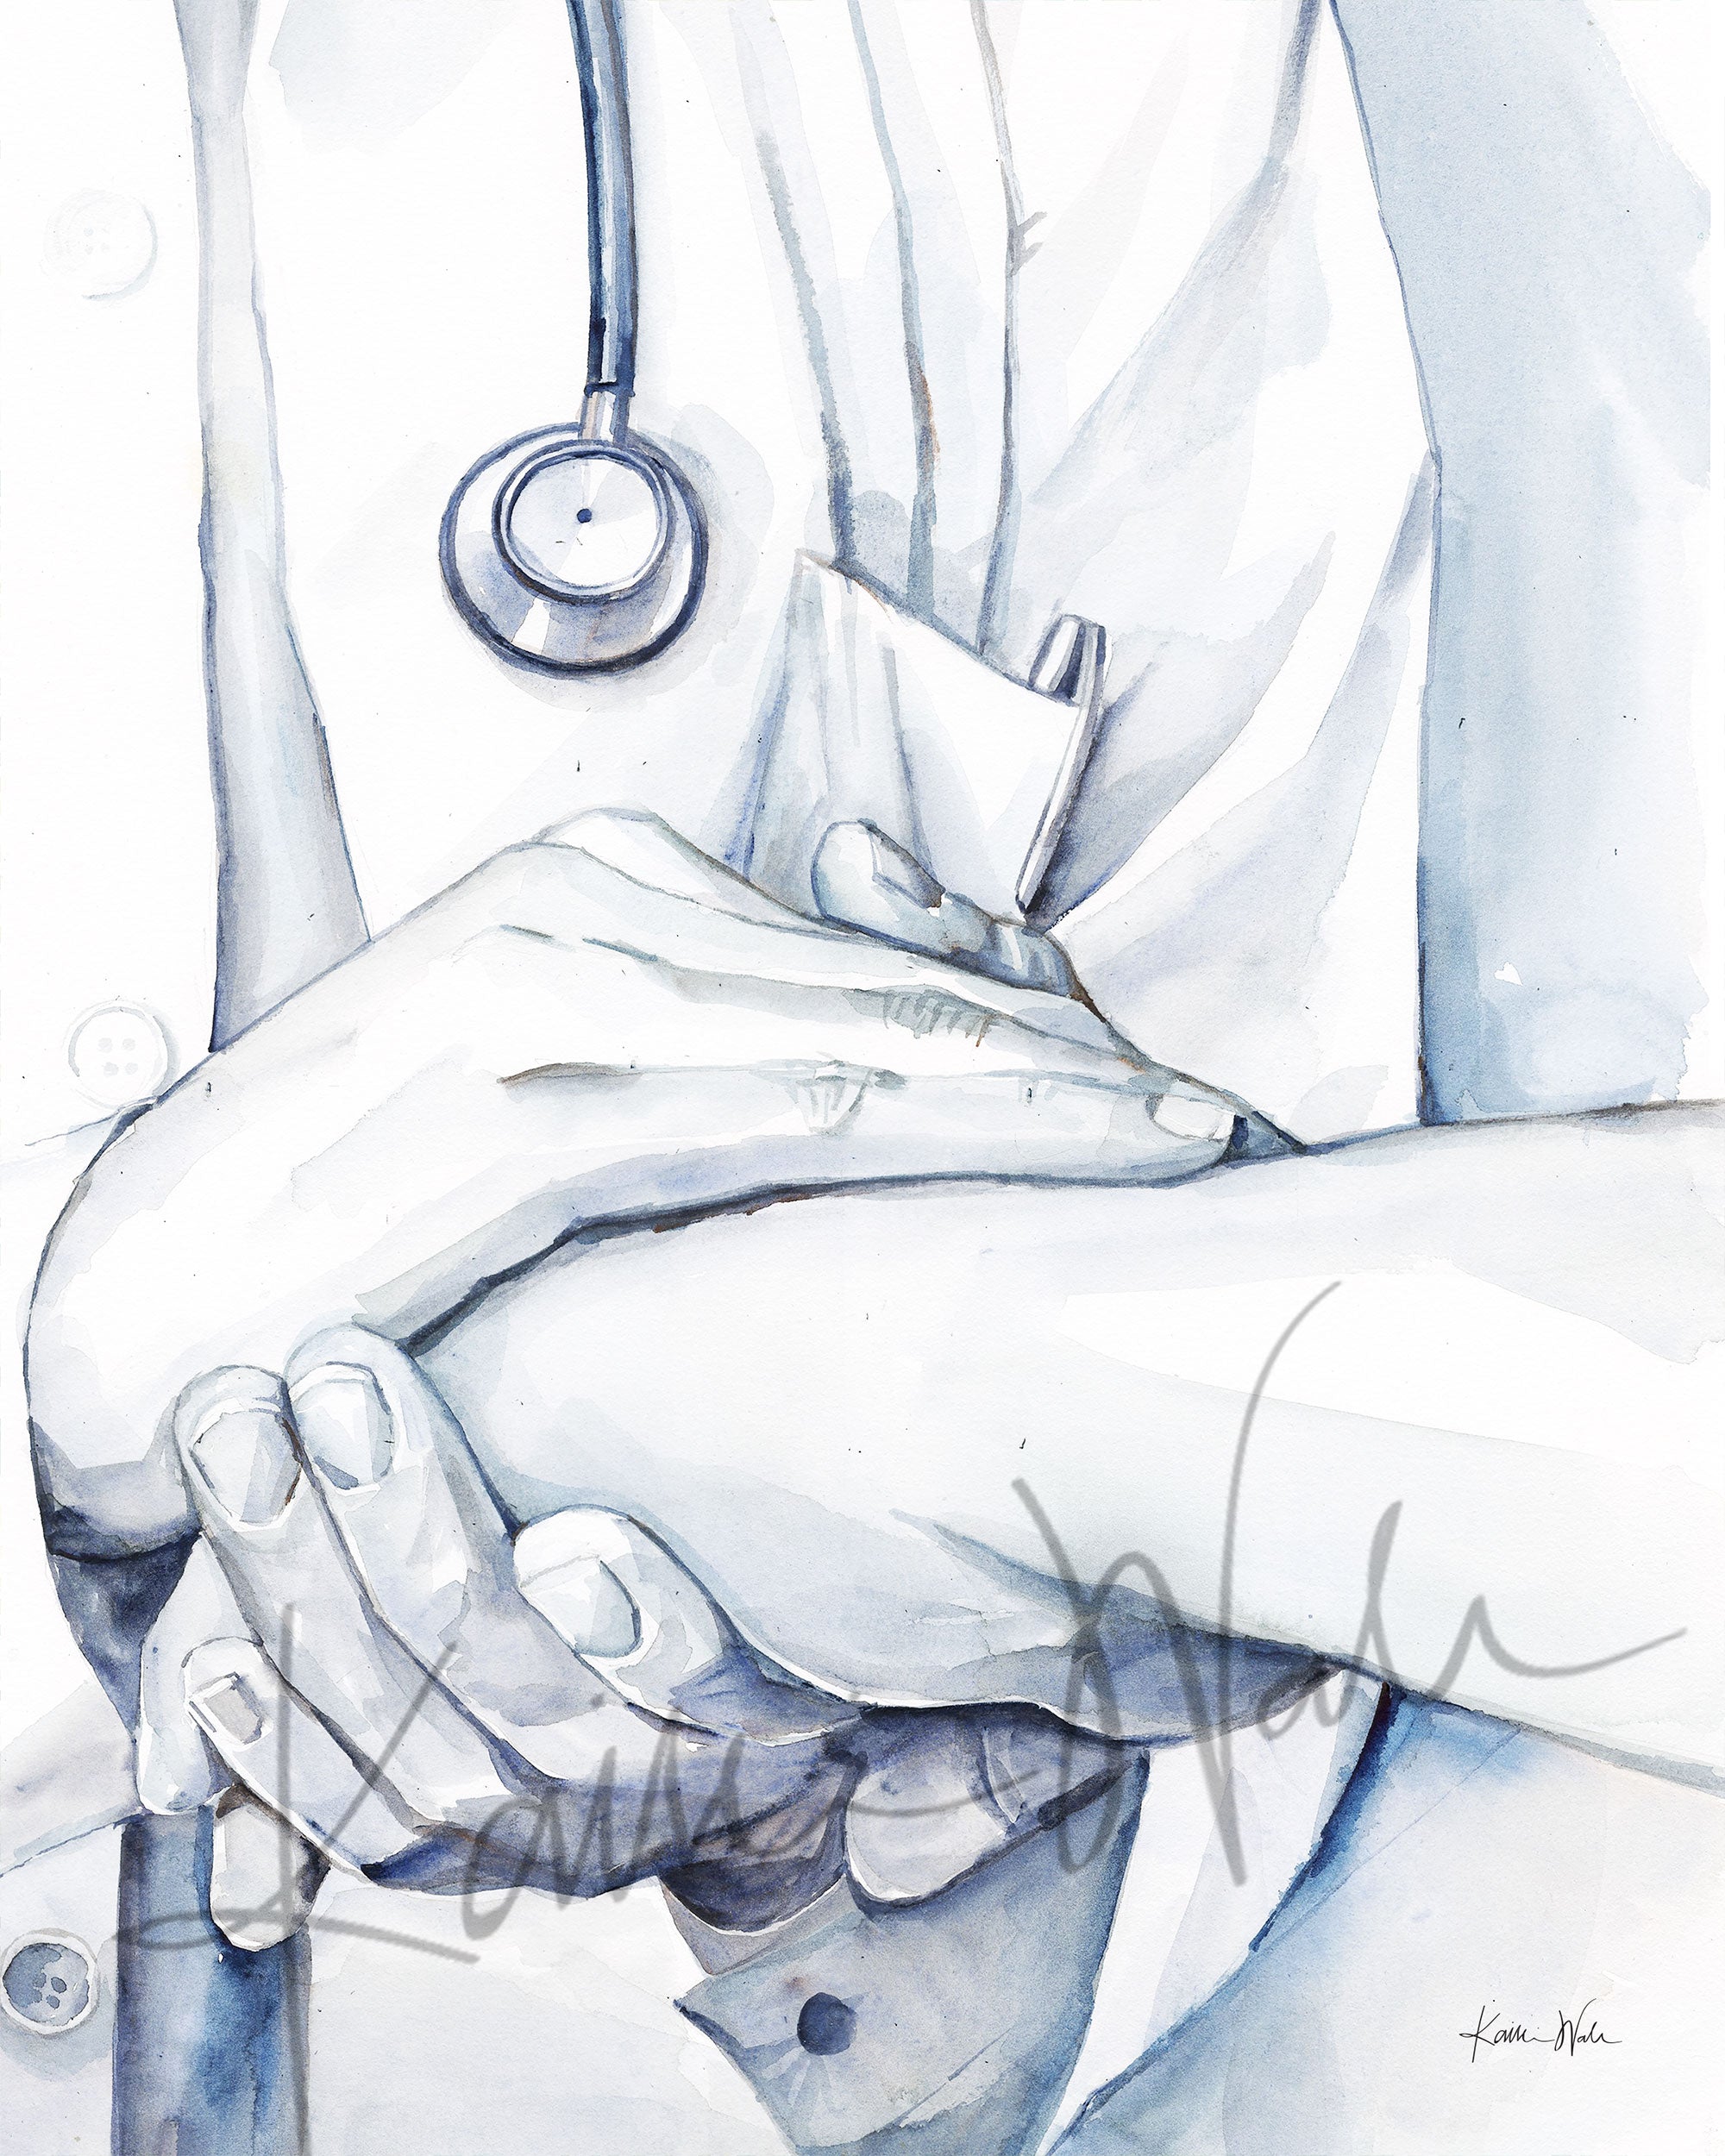 Unframed watercolor painting of a doctor holding a patient’s hand in comfort